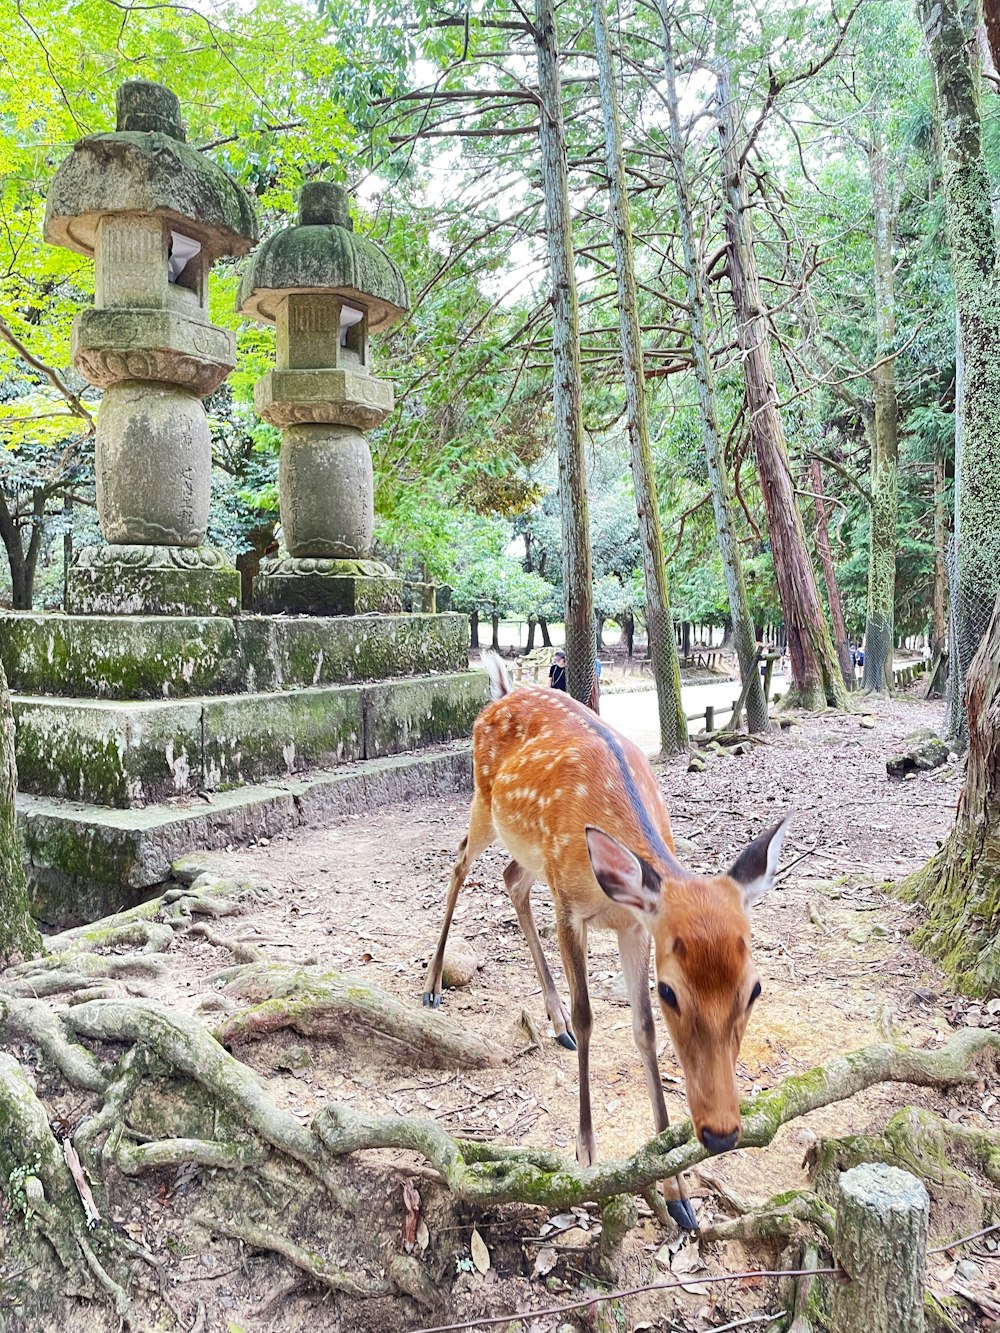 a small deer standing in the middle of a forest